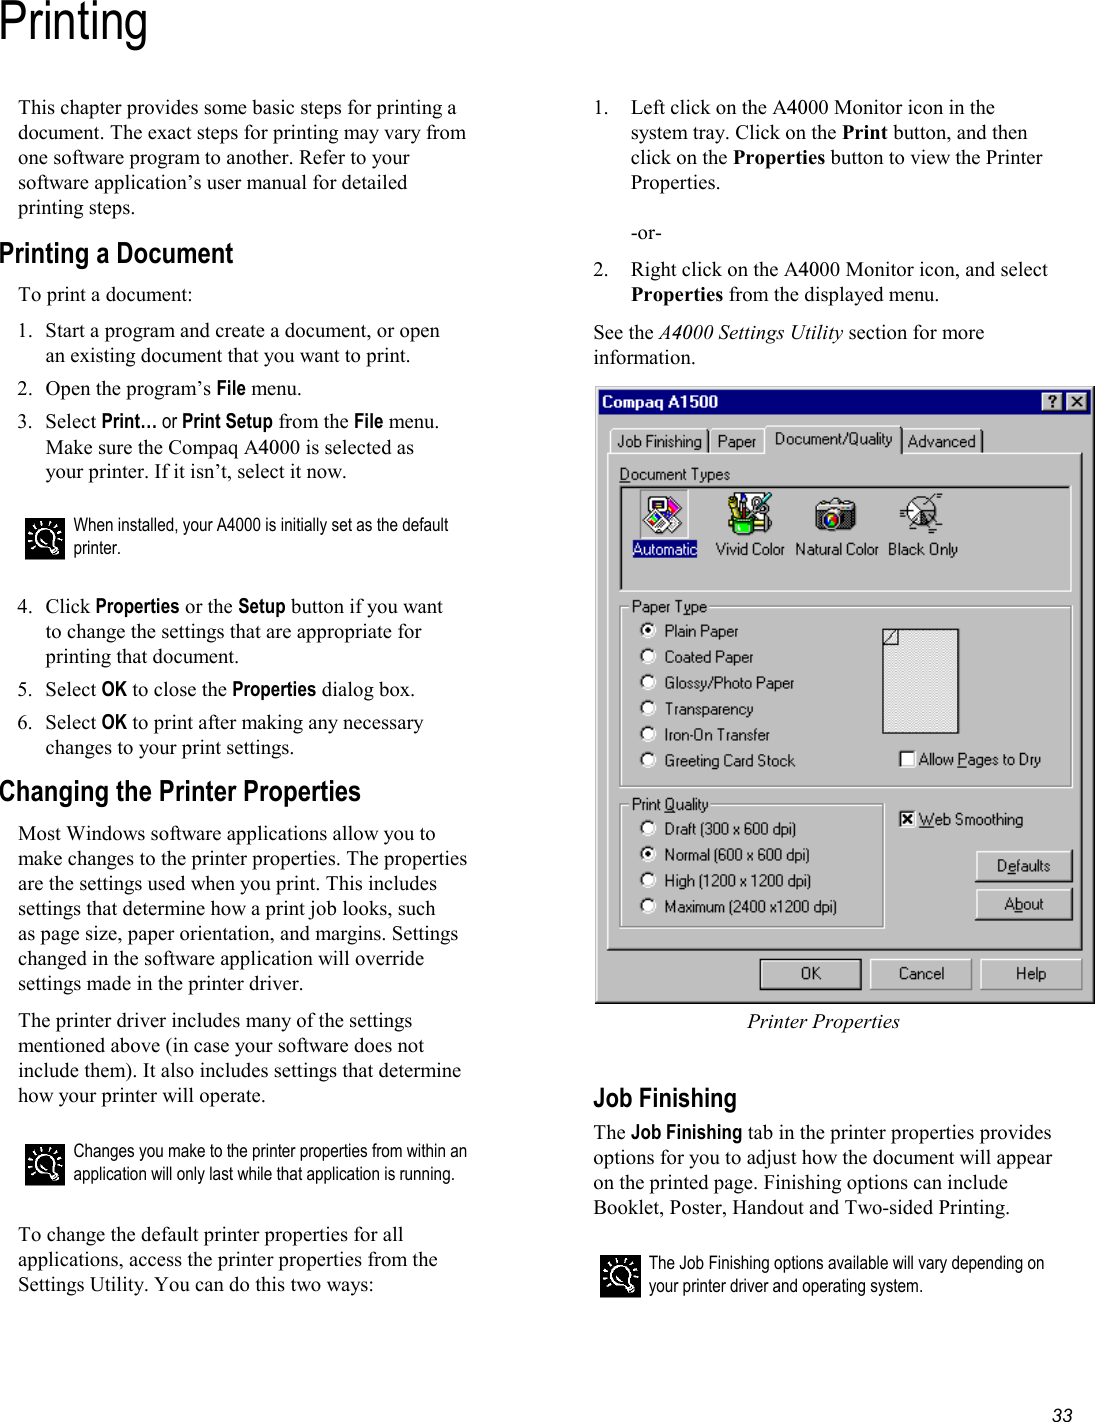   33 PrintingThis chapter provides some basic steps for printing a document. The exact steps for printing may vary from one software program to another. Refer to your software application’s user manual for detailed printing steps. Printing a Document To print a document: 1.  Start a program and create a document, or open an existing document that you want to print. 2.  Open the program’s File menu. 3. Select Print… or Print Setup from the File menu. Make sure the Compaq A4000 is selected as your printer. If it isn’t, select it now.   When installed, your A4000 is initially set as the default printer.   4. Click Properties or the Setup button if you want to change the settings that are appropriate for printing that document. 5. Select OK to close the Properties dialog box. 6. Select OK to print after making any necessary changes to your print settings. Changing the Printer Properties Most Windows software applications allow you to make changes to the printer properties. The properties are the settings used when you print. This includes settings that determine how a print job looks, such  as page size, paper orientation, and margins. Settings changed in the software application will override settings made in the printer driver. The printer driver includes many of the settings mentioned above (in case your software does not include them). It also includes settings that determine how your printer will operate.   Changes you make to the printer properties from within an application will only last while that application is running.  To change the default printer properties for all applications, access the printer properties from the Settings Utility. You can do this two ways: 1. Left click on the A4000 Monitor icon in the system tray. Click on the Print button, and then click on the Properties button to view the Printer Properties.  -or- 2. Right click on the A4000 Monitor icon, and select Properties from the displayed menu. See the A4000 Settings Utility section for more information. Printer Properties  Job Finishing The Job Finishing tab in the printer properties provides options for you to adjust how the document will appear on the printed page. Finishing options can include Booklet, Poster, Handout and Two-sided Printing.  The Job Finishing options available will vary depending on your printer driver and operating system.  